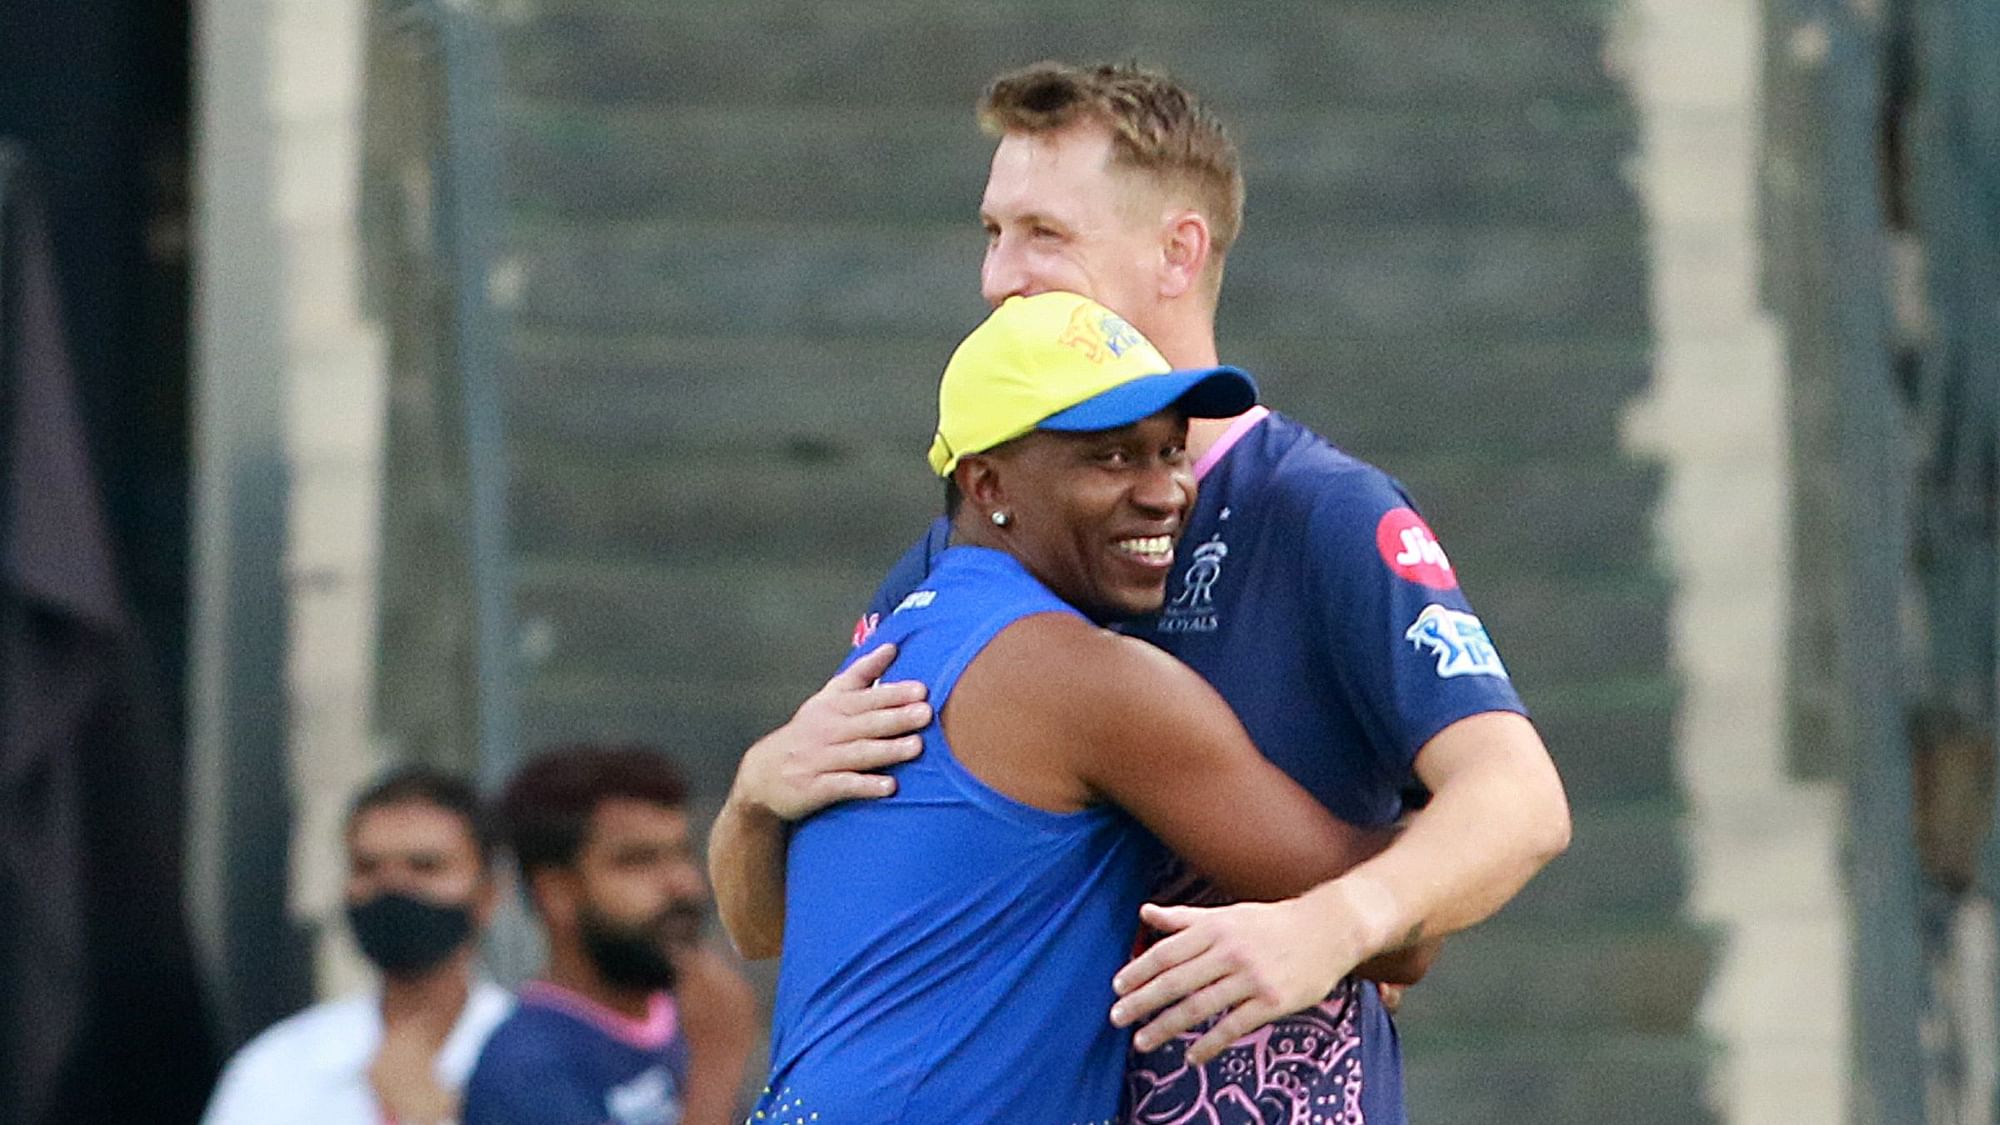 Sanju Samson has won the toss and elected to bowl first in IPL’s Monday fixture against MS Dhoni’s Chennai Super Kings.